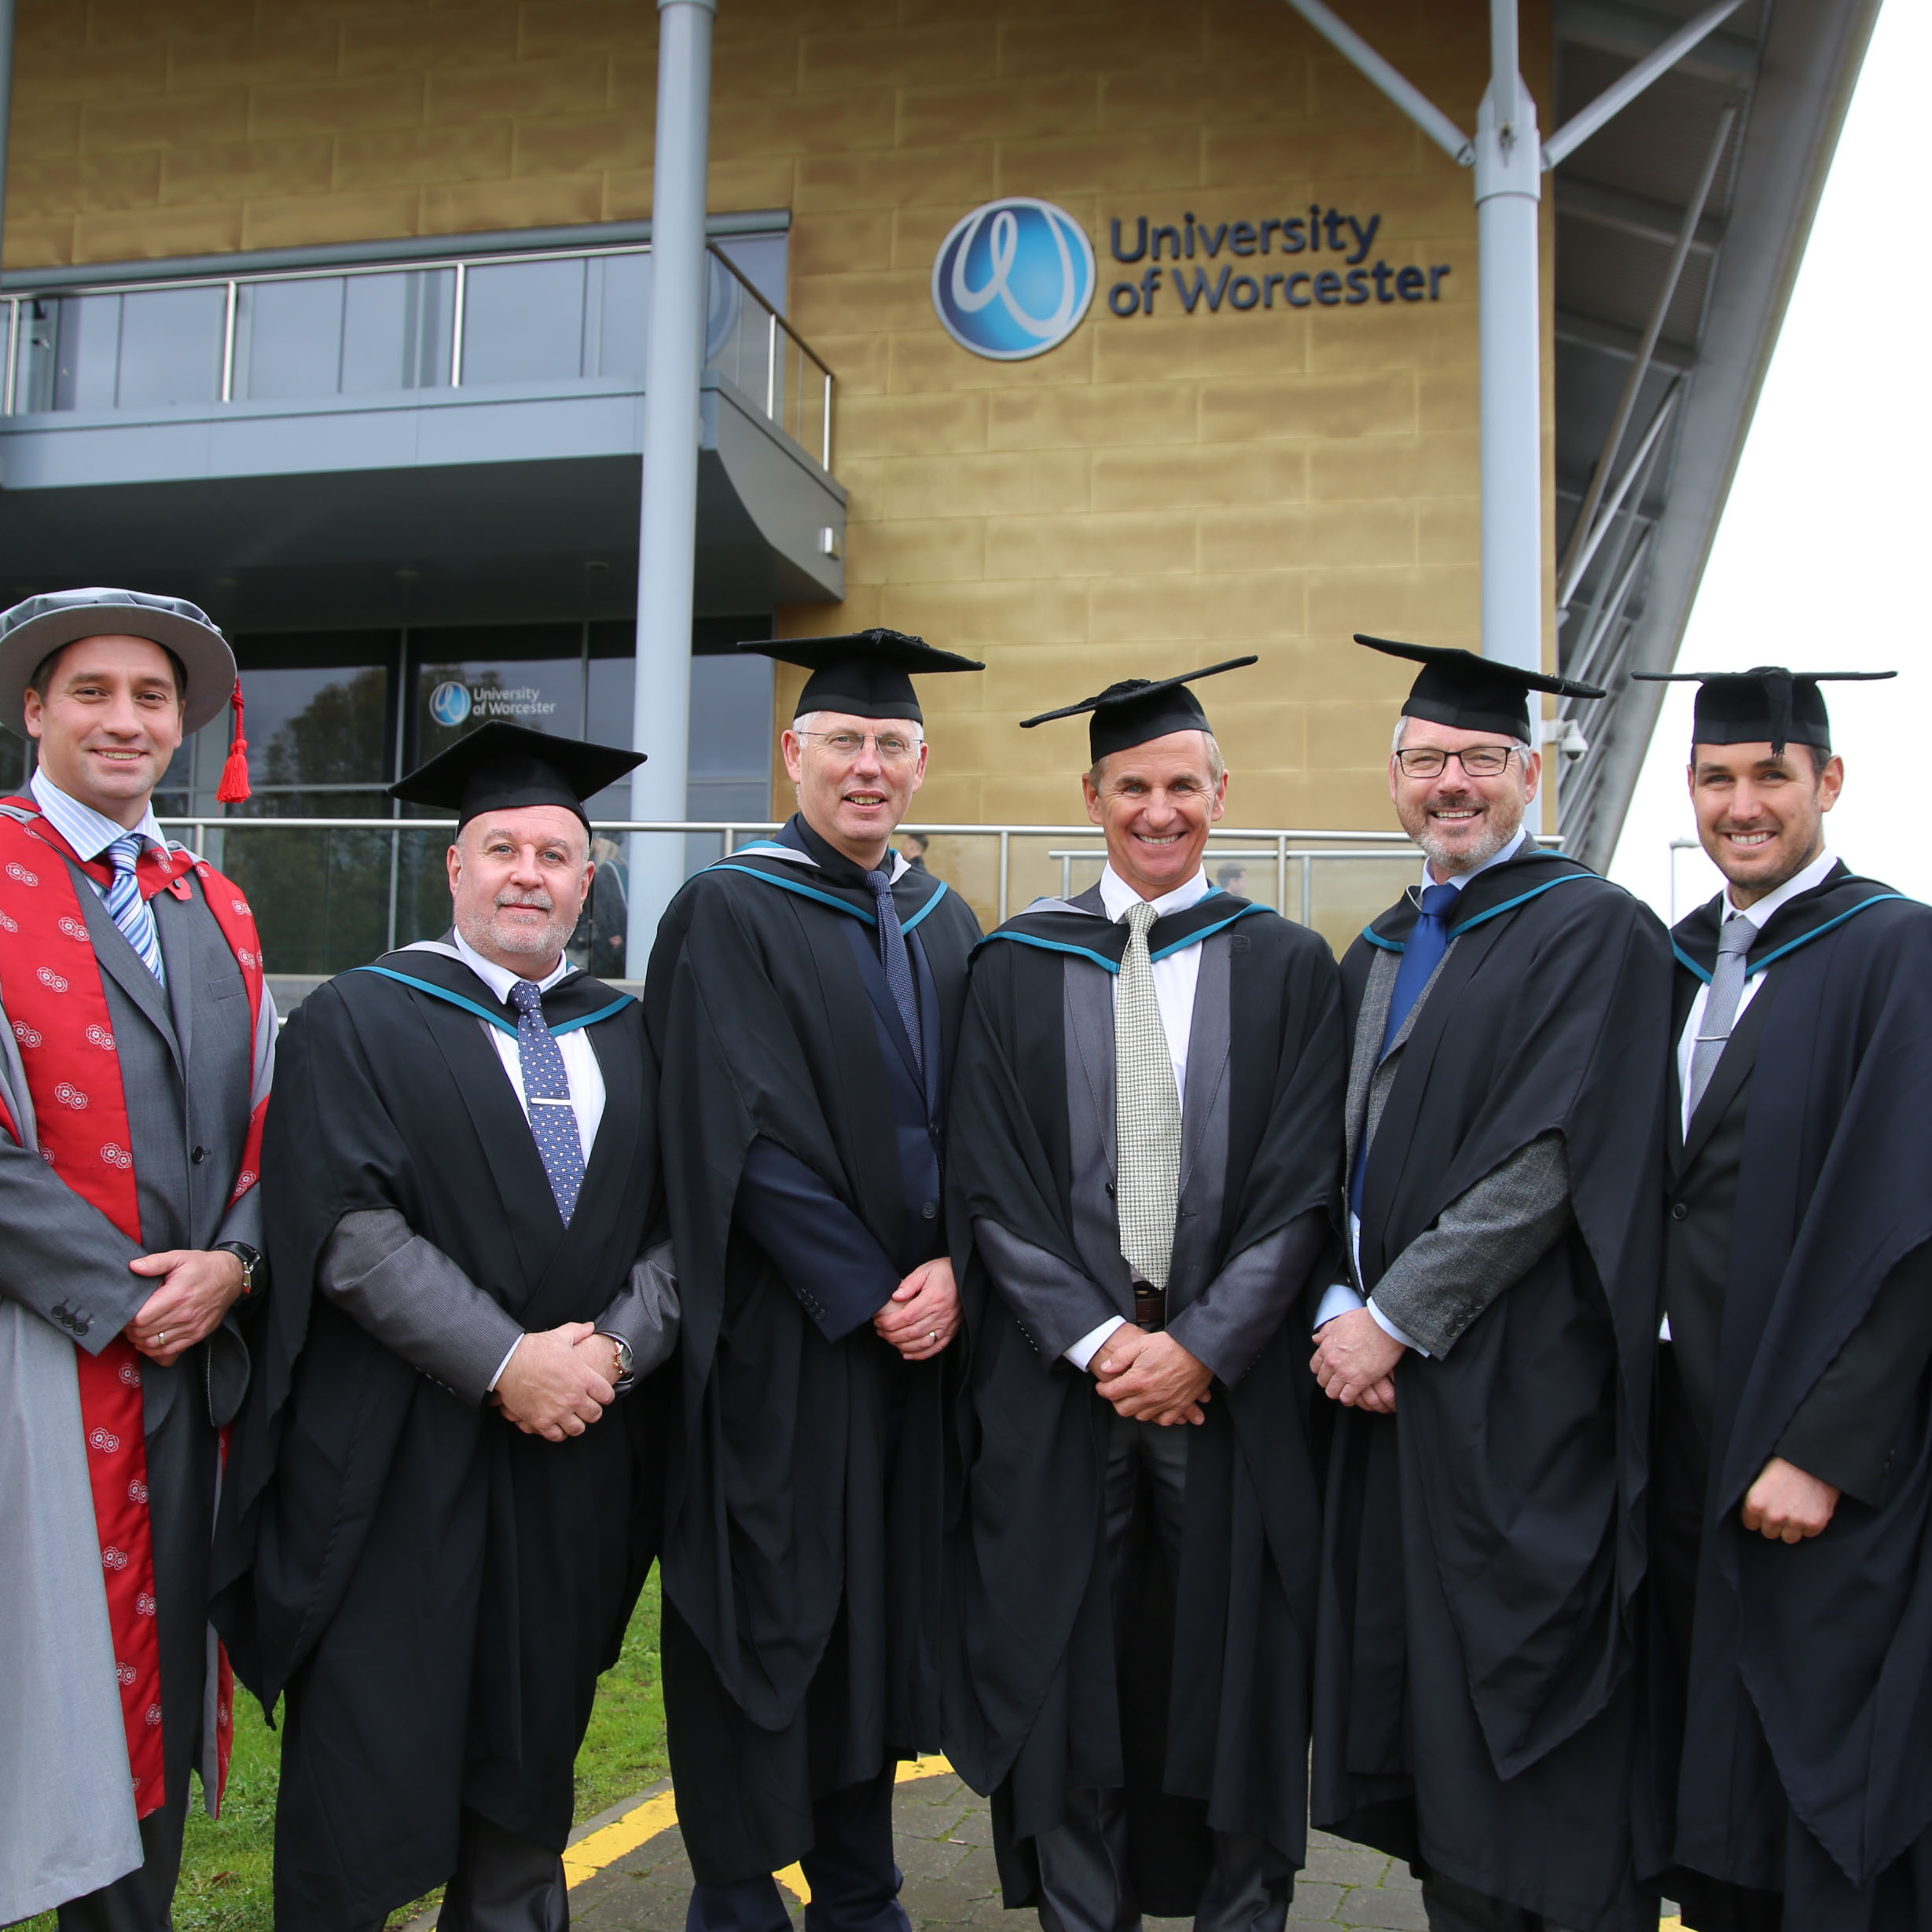 Group photo of mature men wearing graduation robes outside the university arena